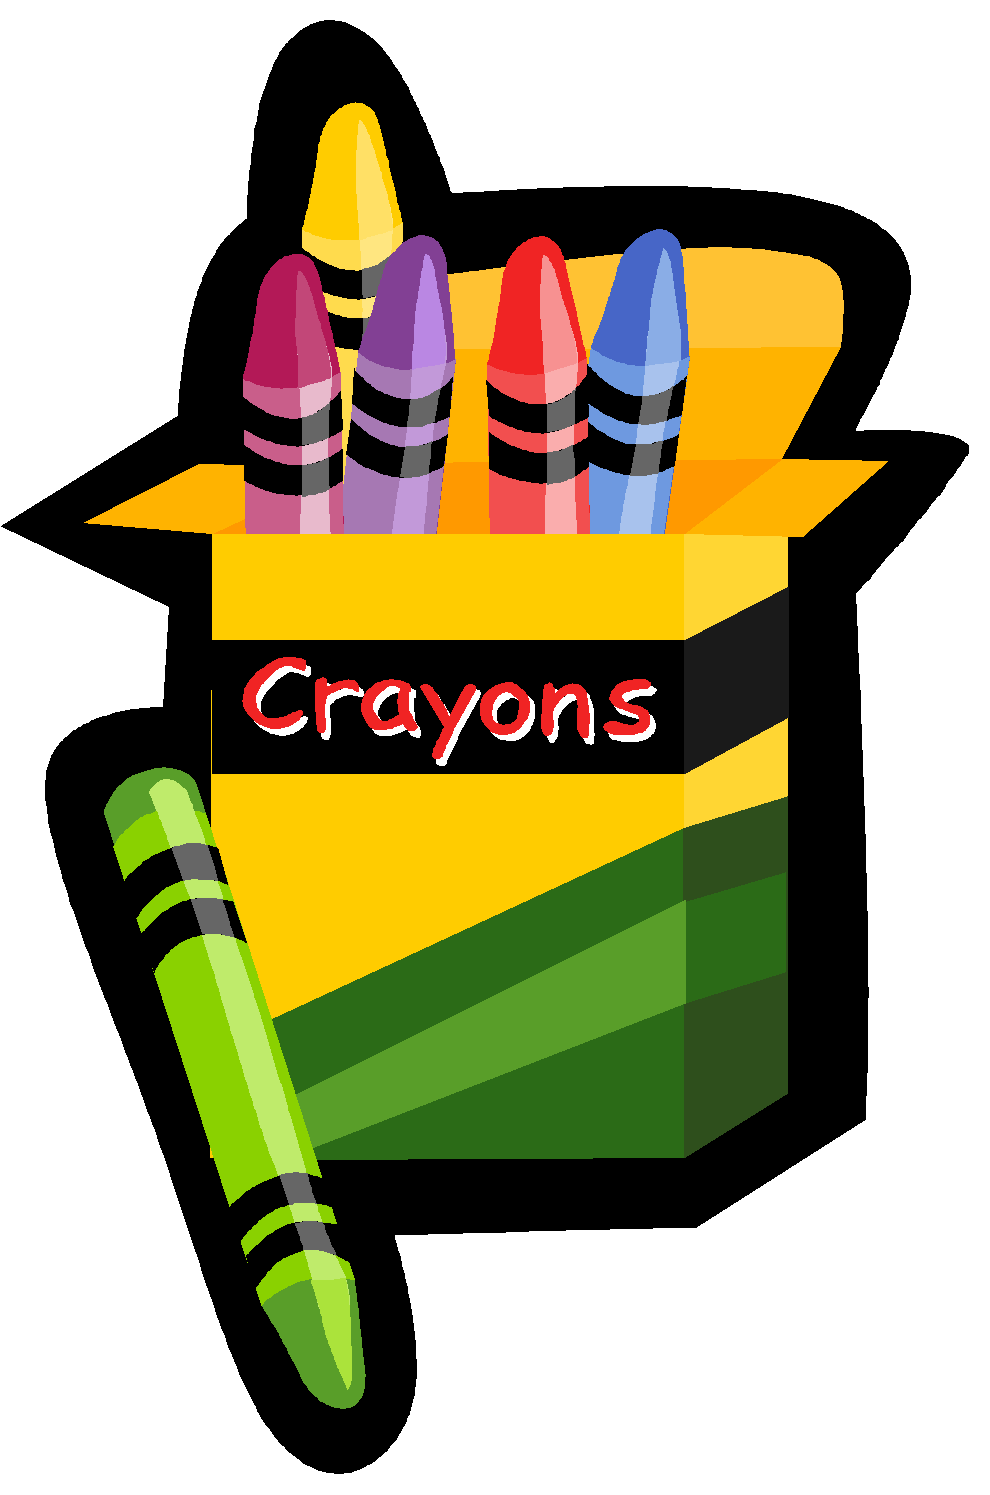 School supplies clipart craft projects clipartoons